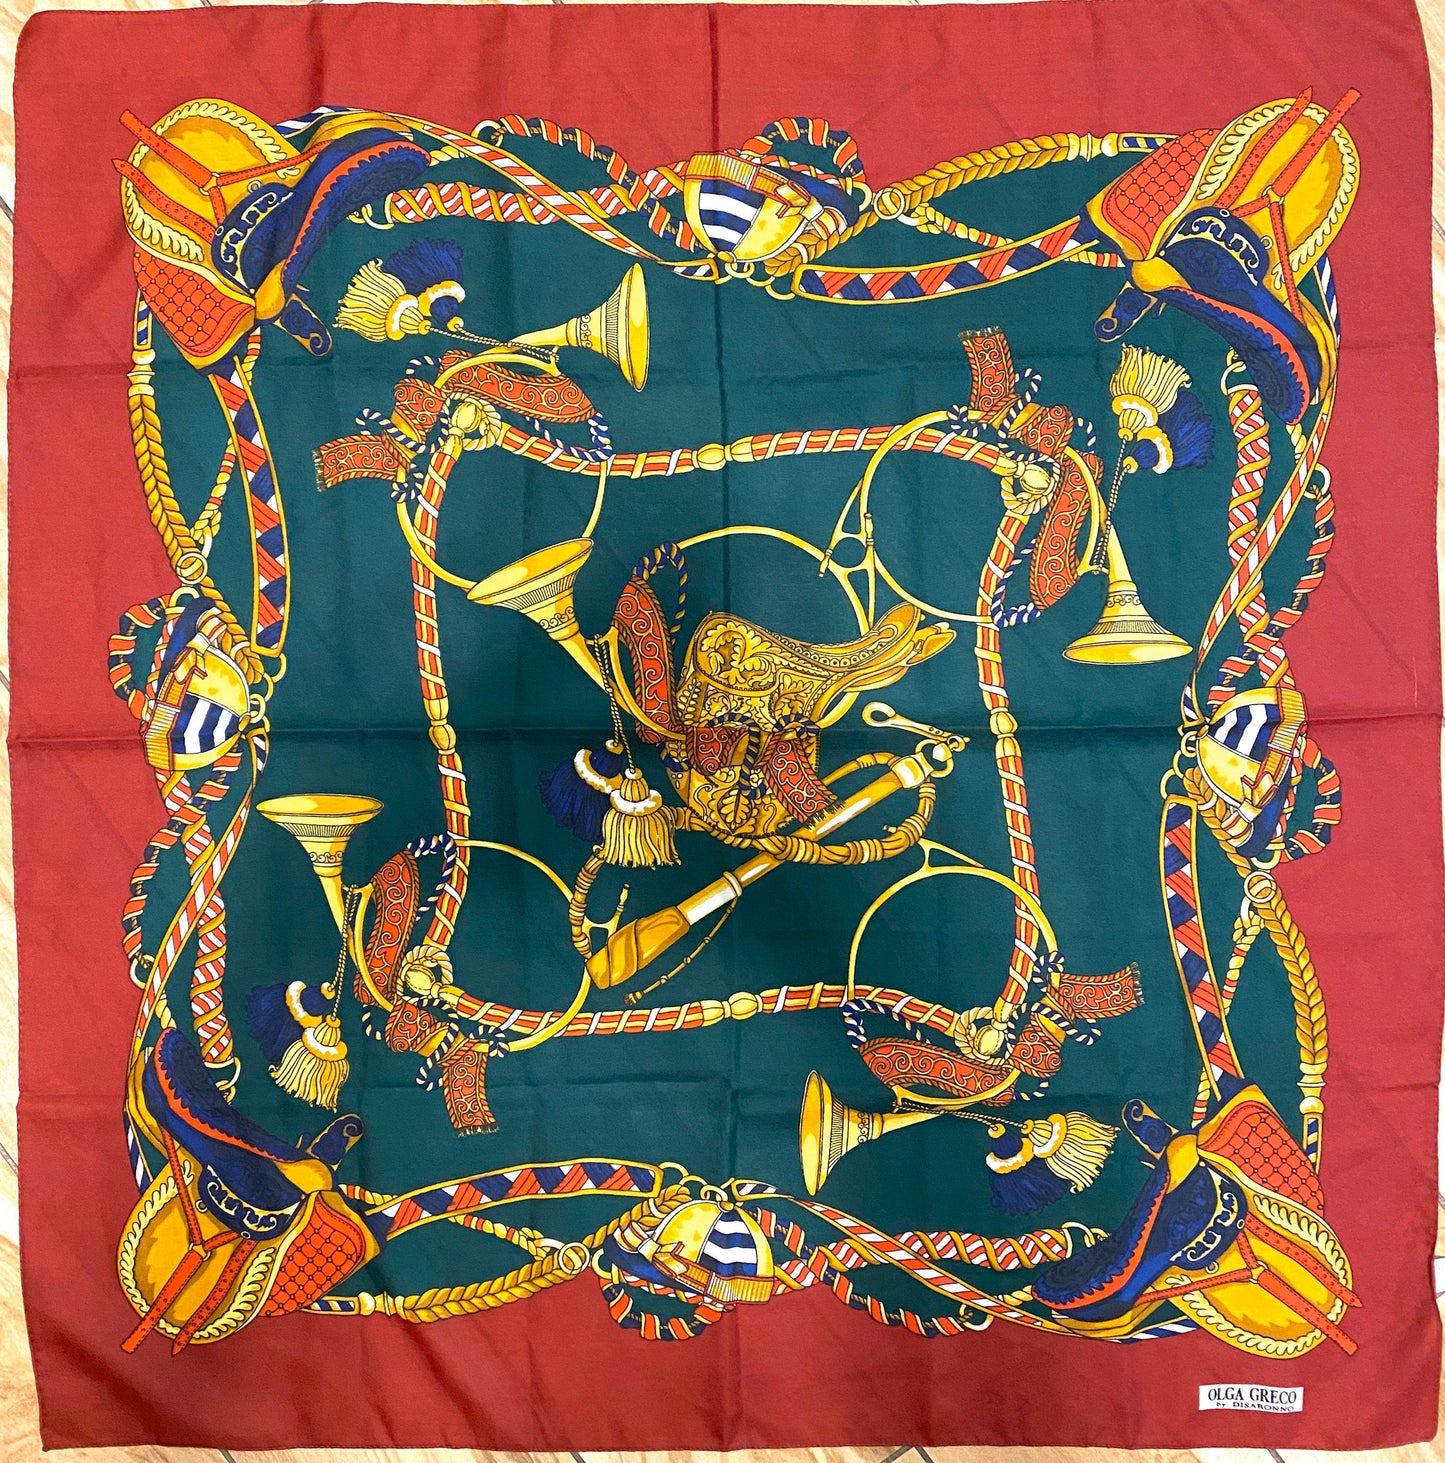 Olga Greco satin baroque red / green hermes style royalty / chevalry print scarf, 80s minty